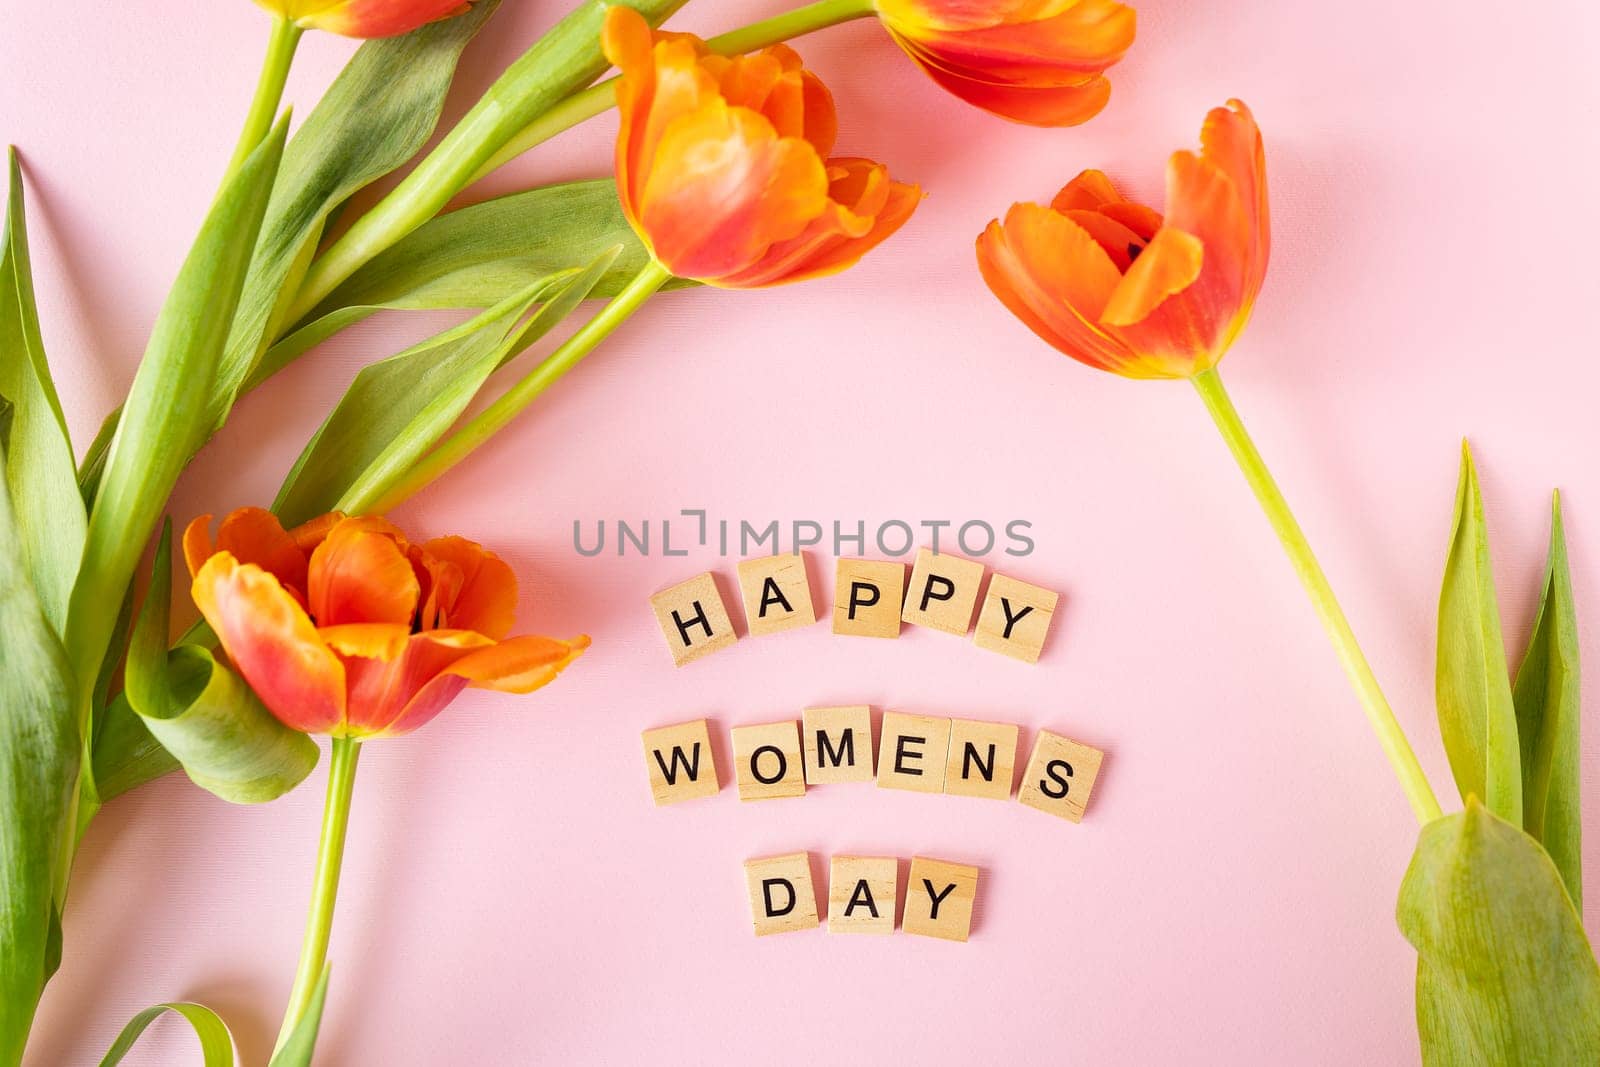 March 8, postcard. Happy Women's Day text sign with orange tulips on pink background. Stylish flat lay with flowers and text, greeting card. by sfinks